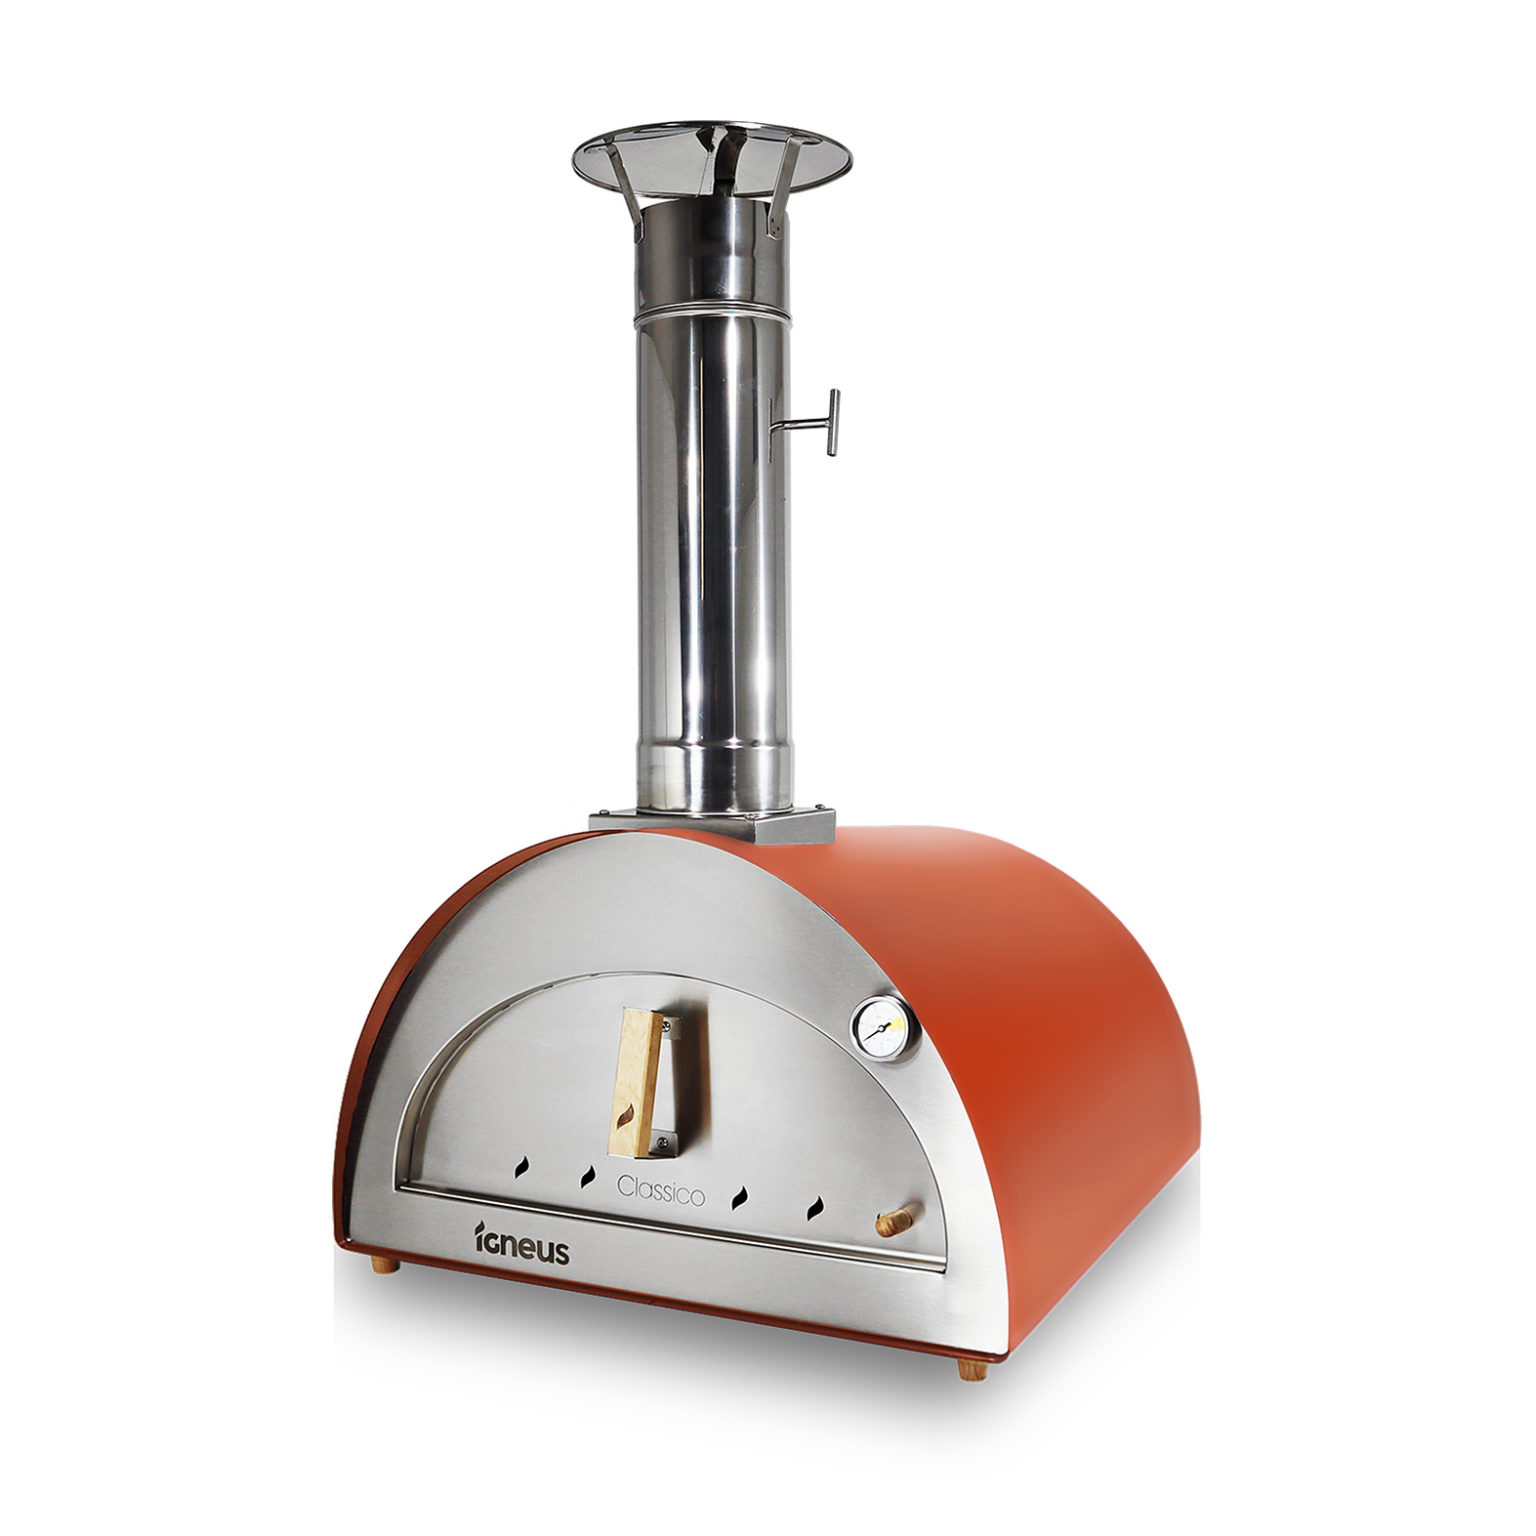 Igneus Classico wood fired pizza oven